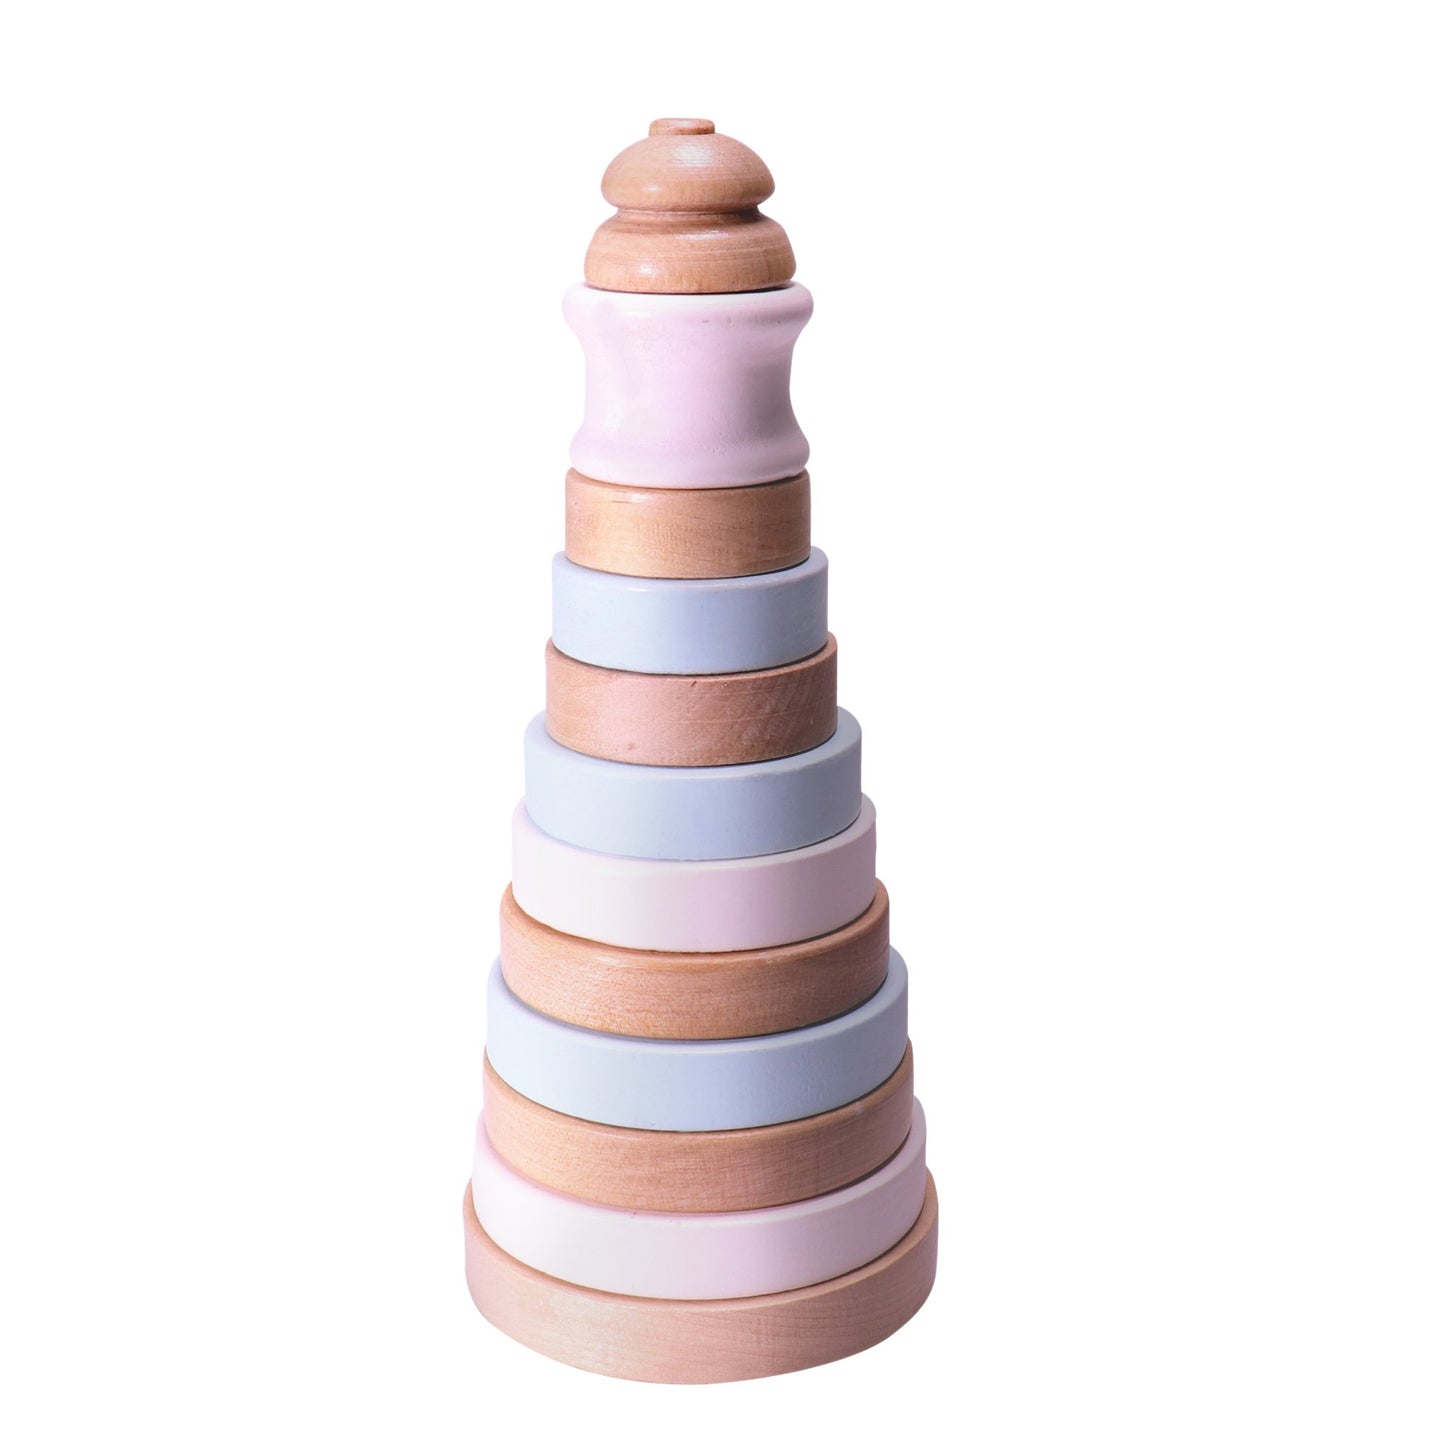 Wooden Stacking Toy - Sky